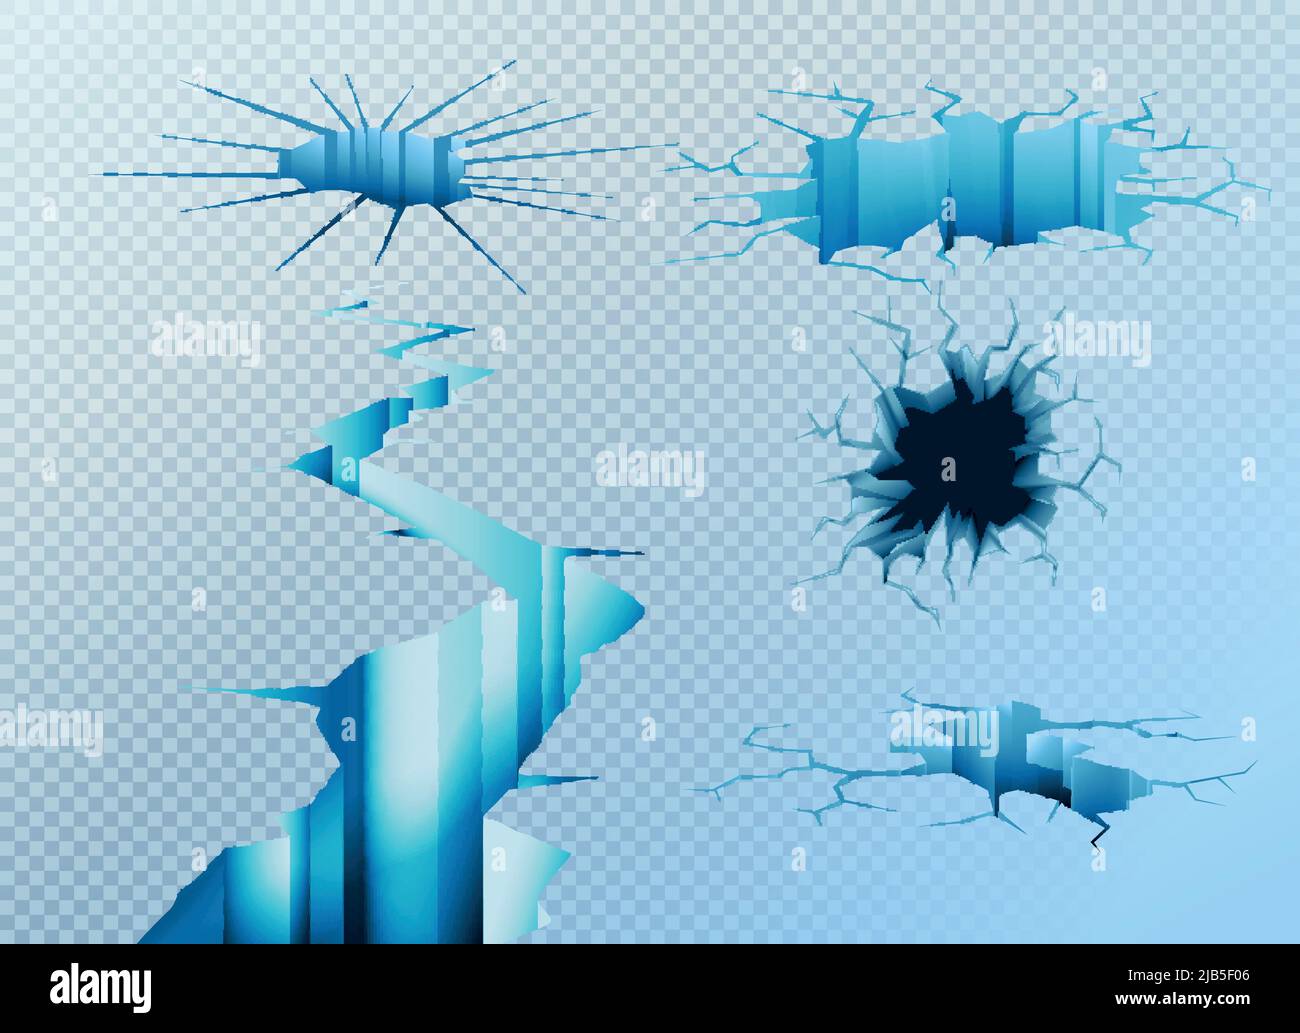 Ice cracks realistic set with isolated images of different holes in ice canopy on transparent background vector illustration Stock Vector